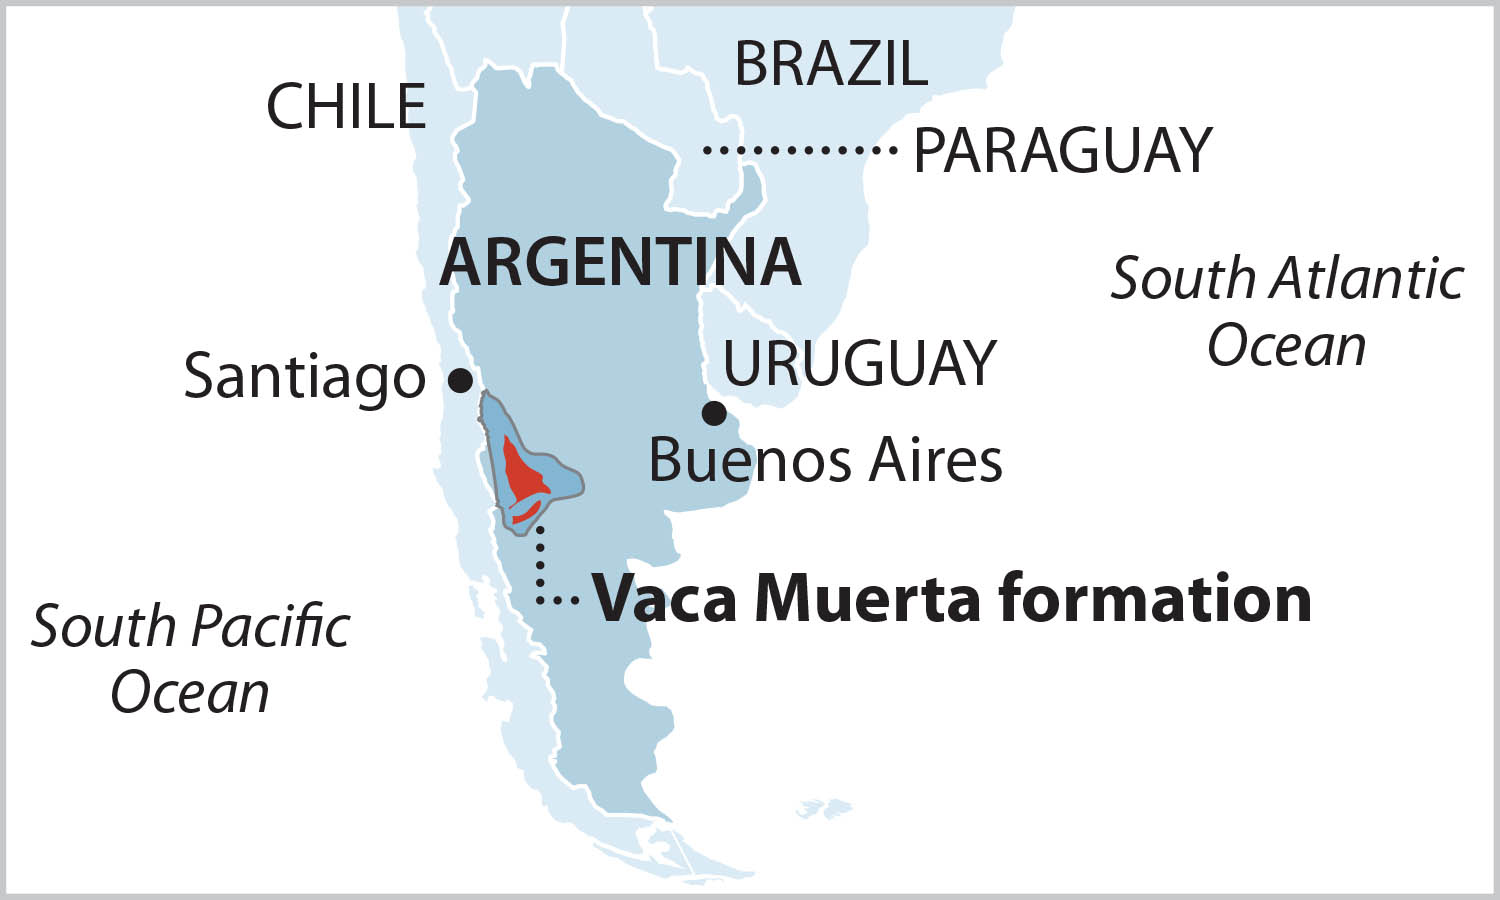 Vaca Muerta is an unconventional hydrocarbon formation located in Patagonia with an extension of 30,000 square kilometers, an area similar to that of Belgium.